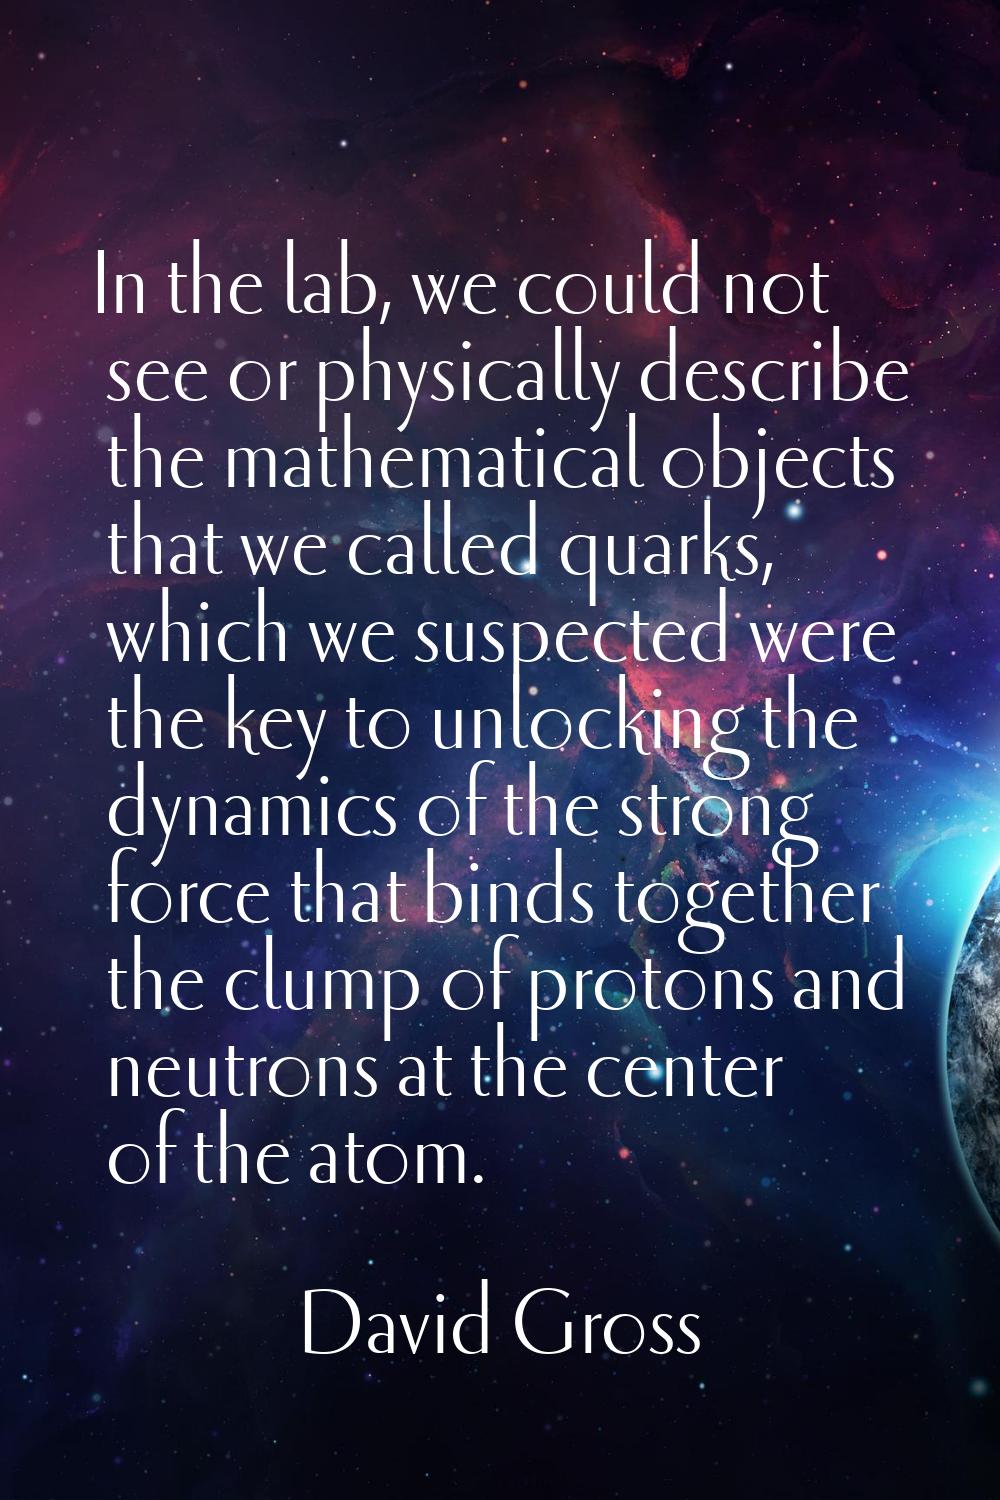 In the lab, we could not see or physically describe the mathematical objects that we called quarks,